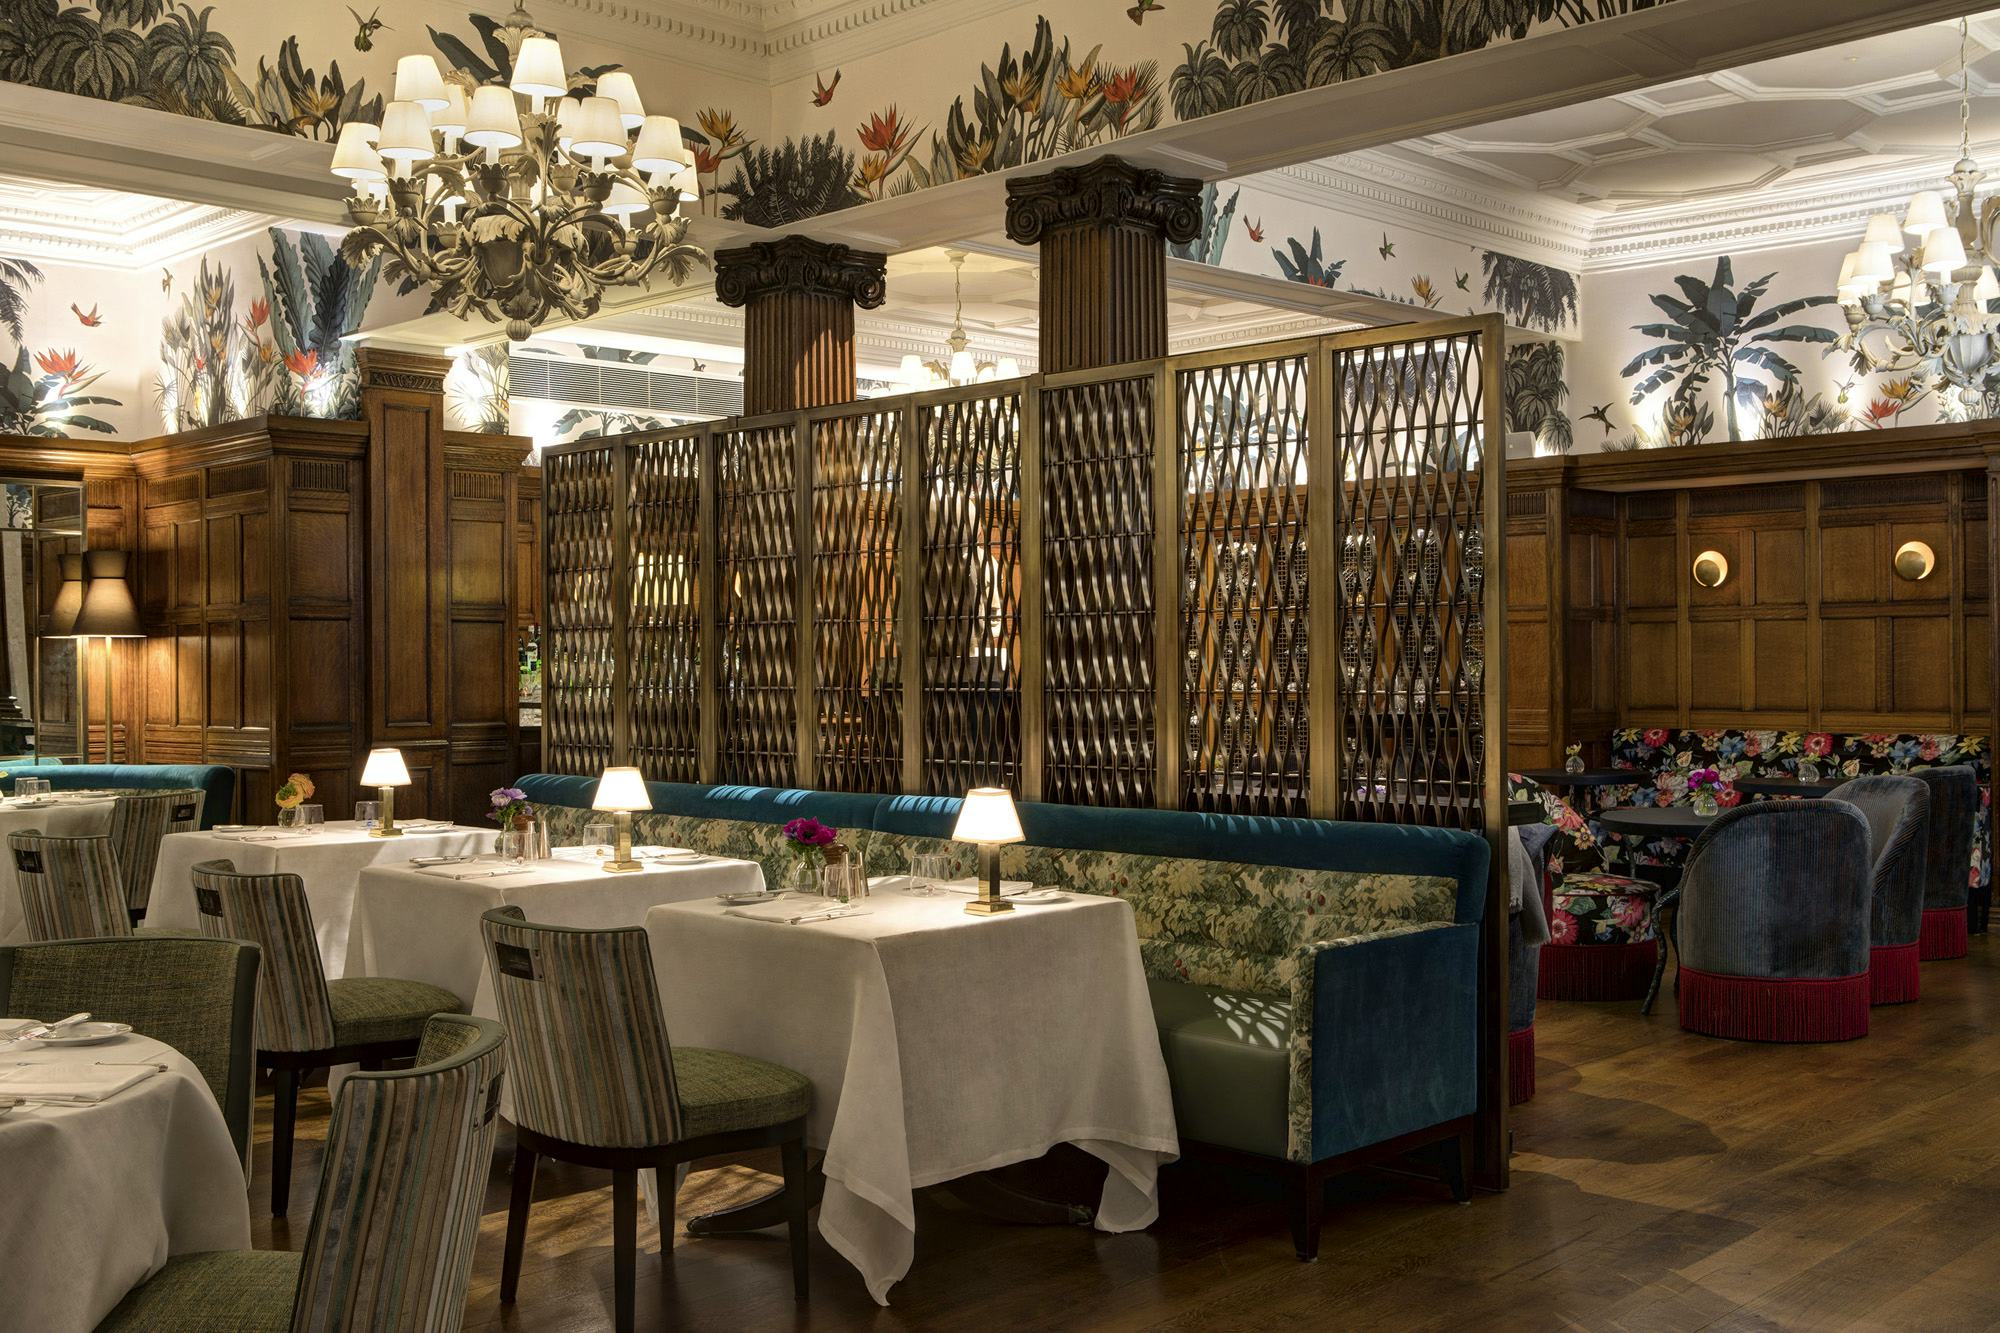 Heinz Beck Brown's Hotel london west end hotels with restaurants main dining room seating luxe interiors